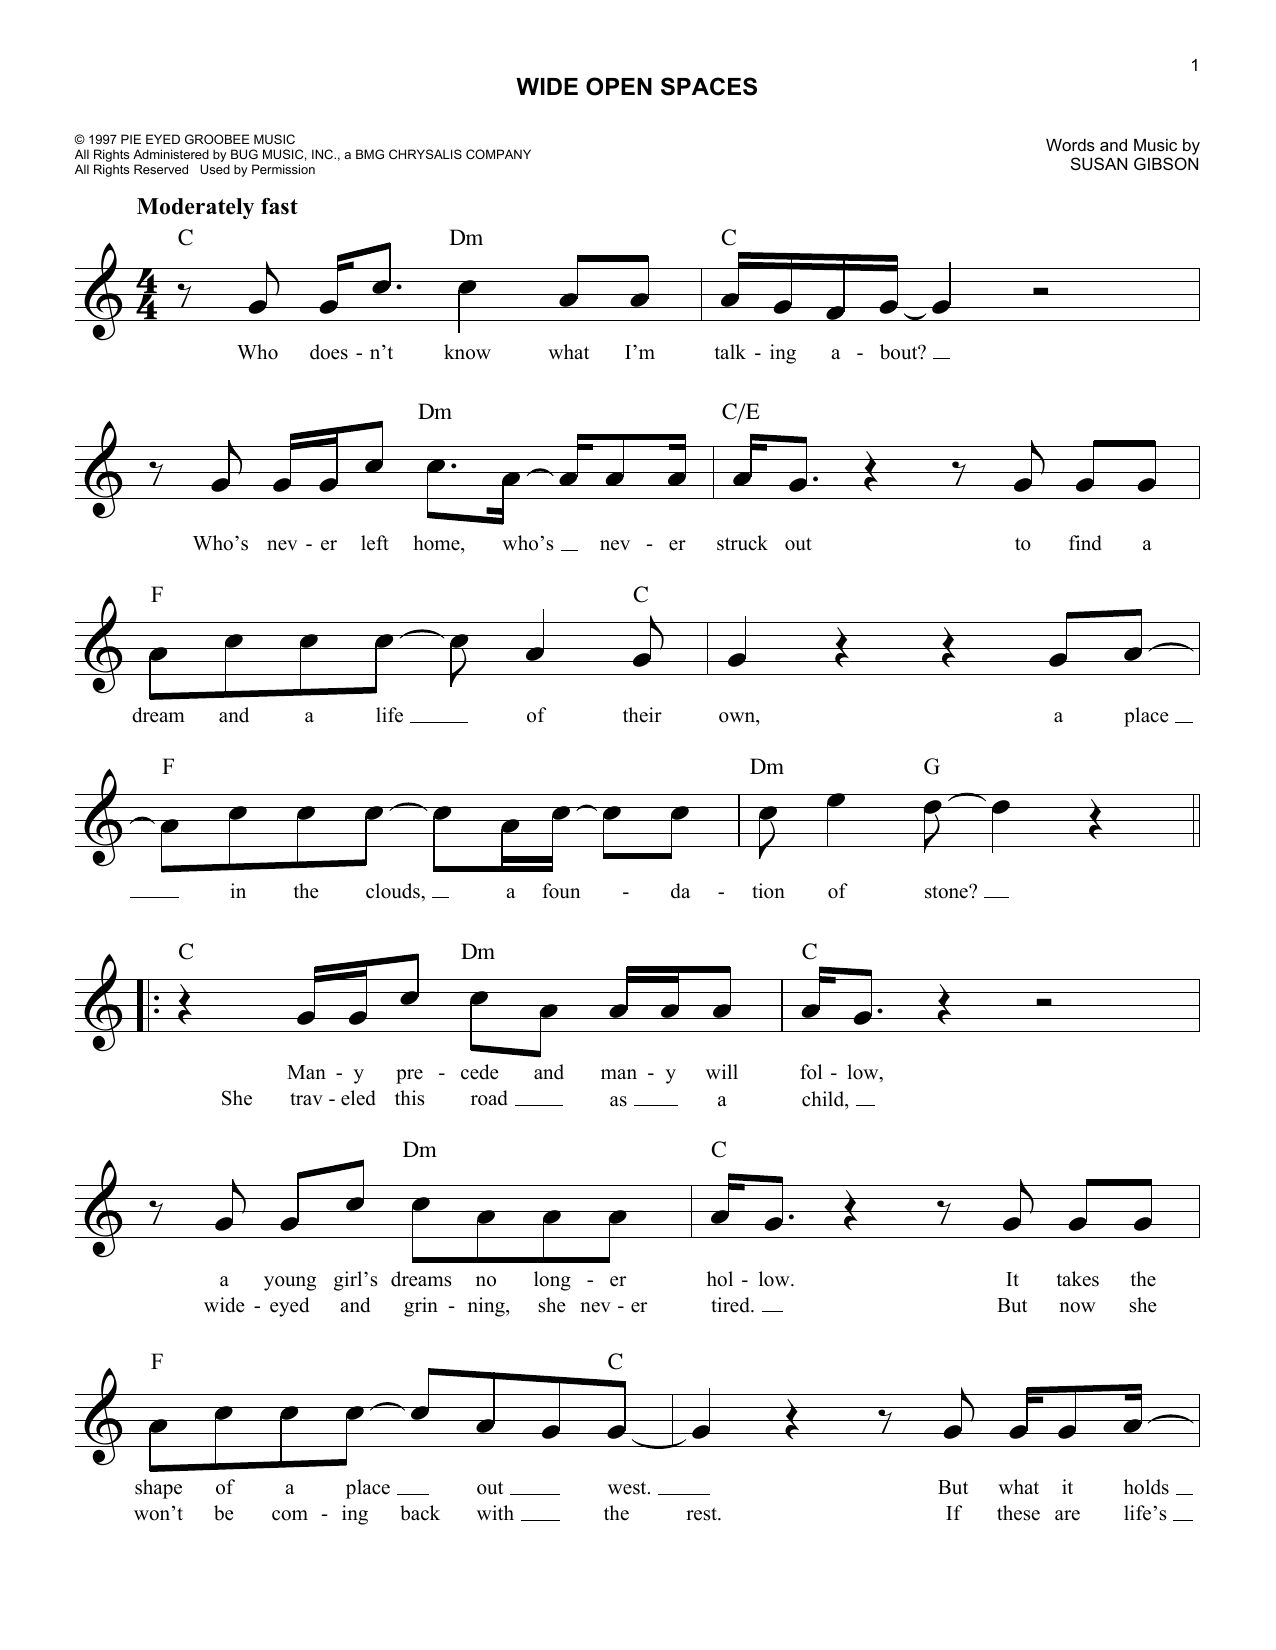 Download Dixie Chicks Wide Open Spaces Sheet Music